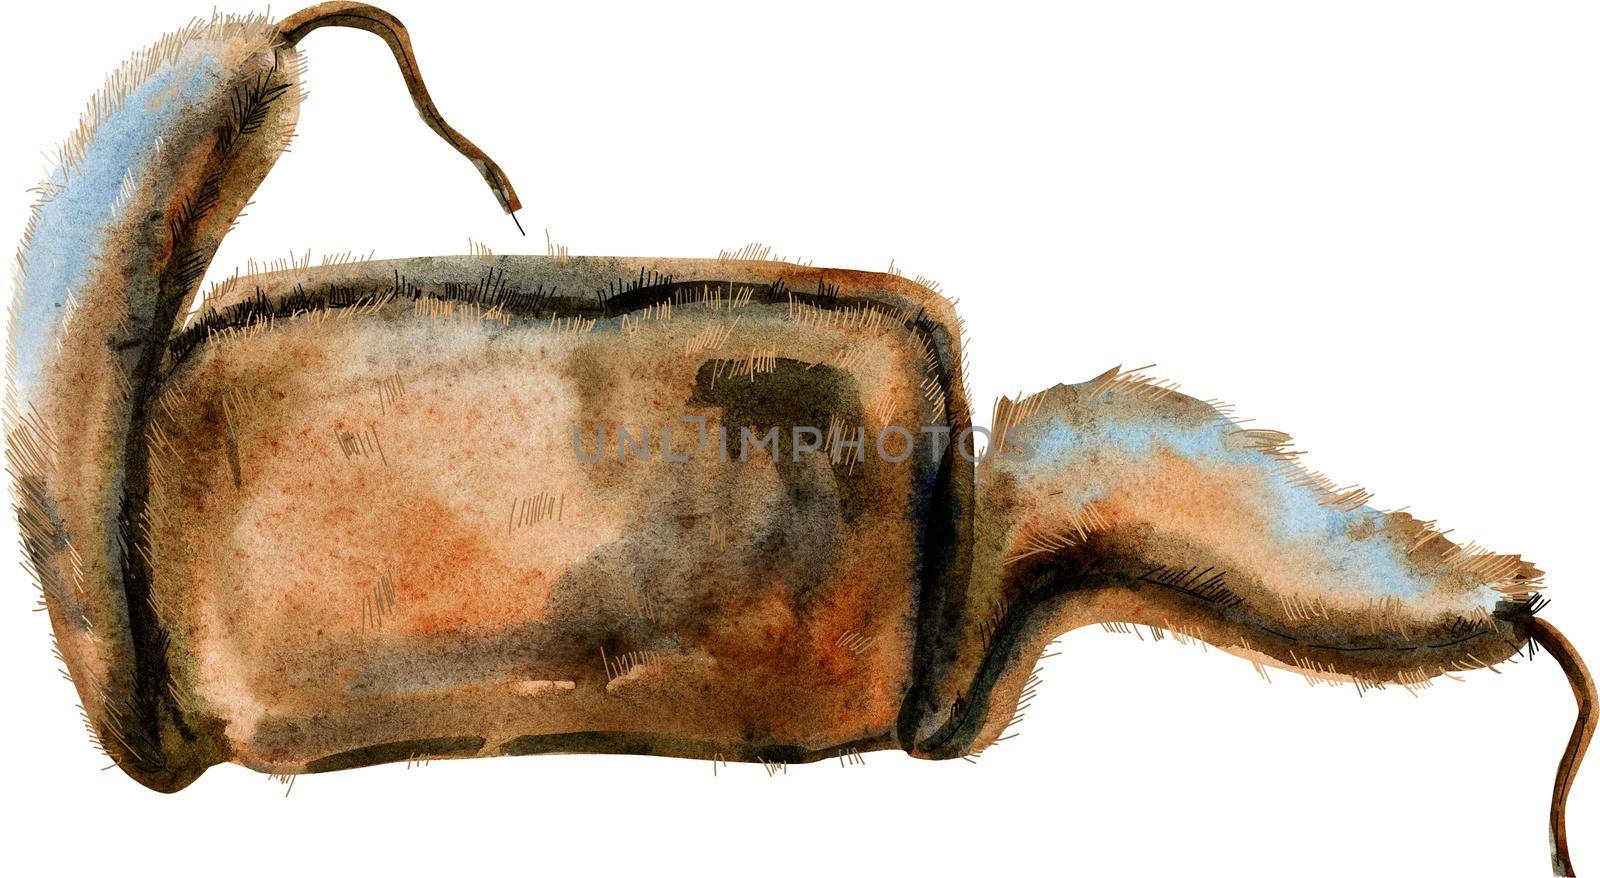 Winter cap. A cap with ear-flaps. Watercolor illustration. by NataOmsk